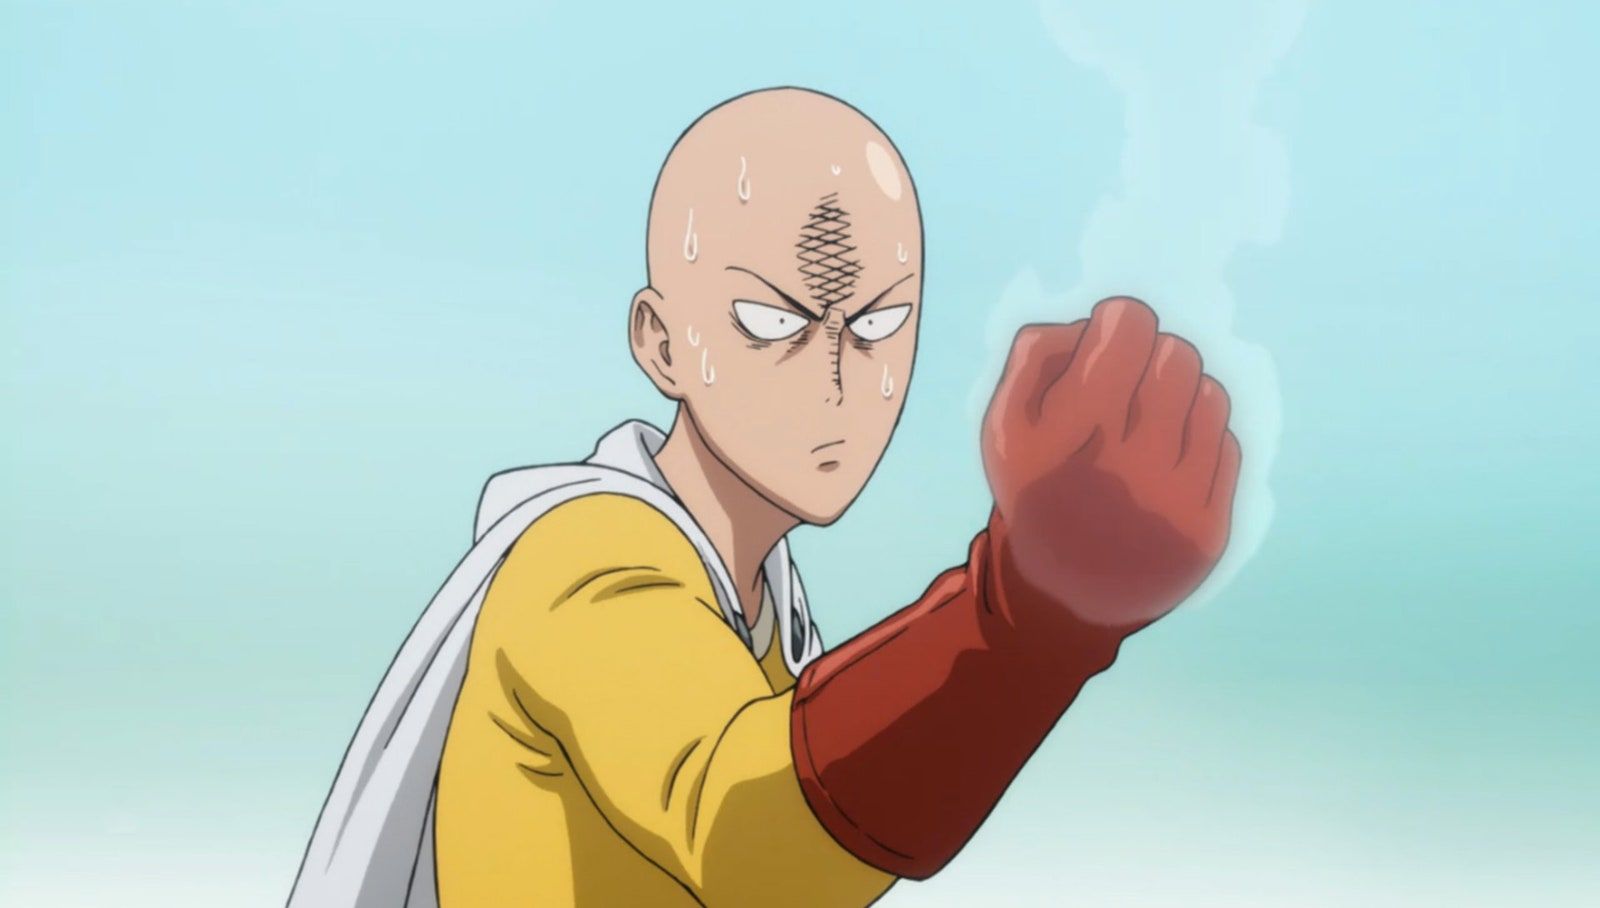 One Punch Man Season 2 on Netflix: Where and How to Watch It?